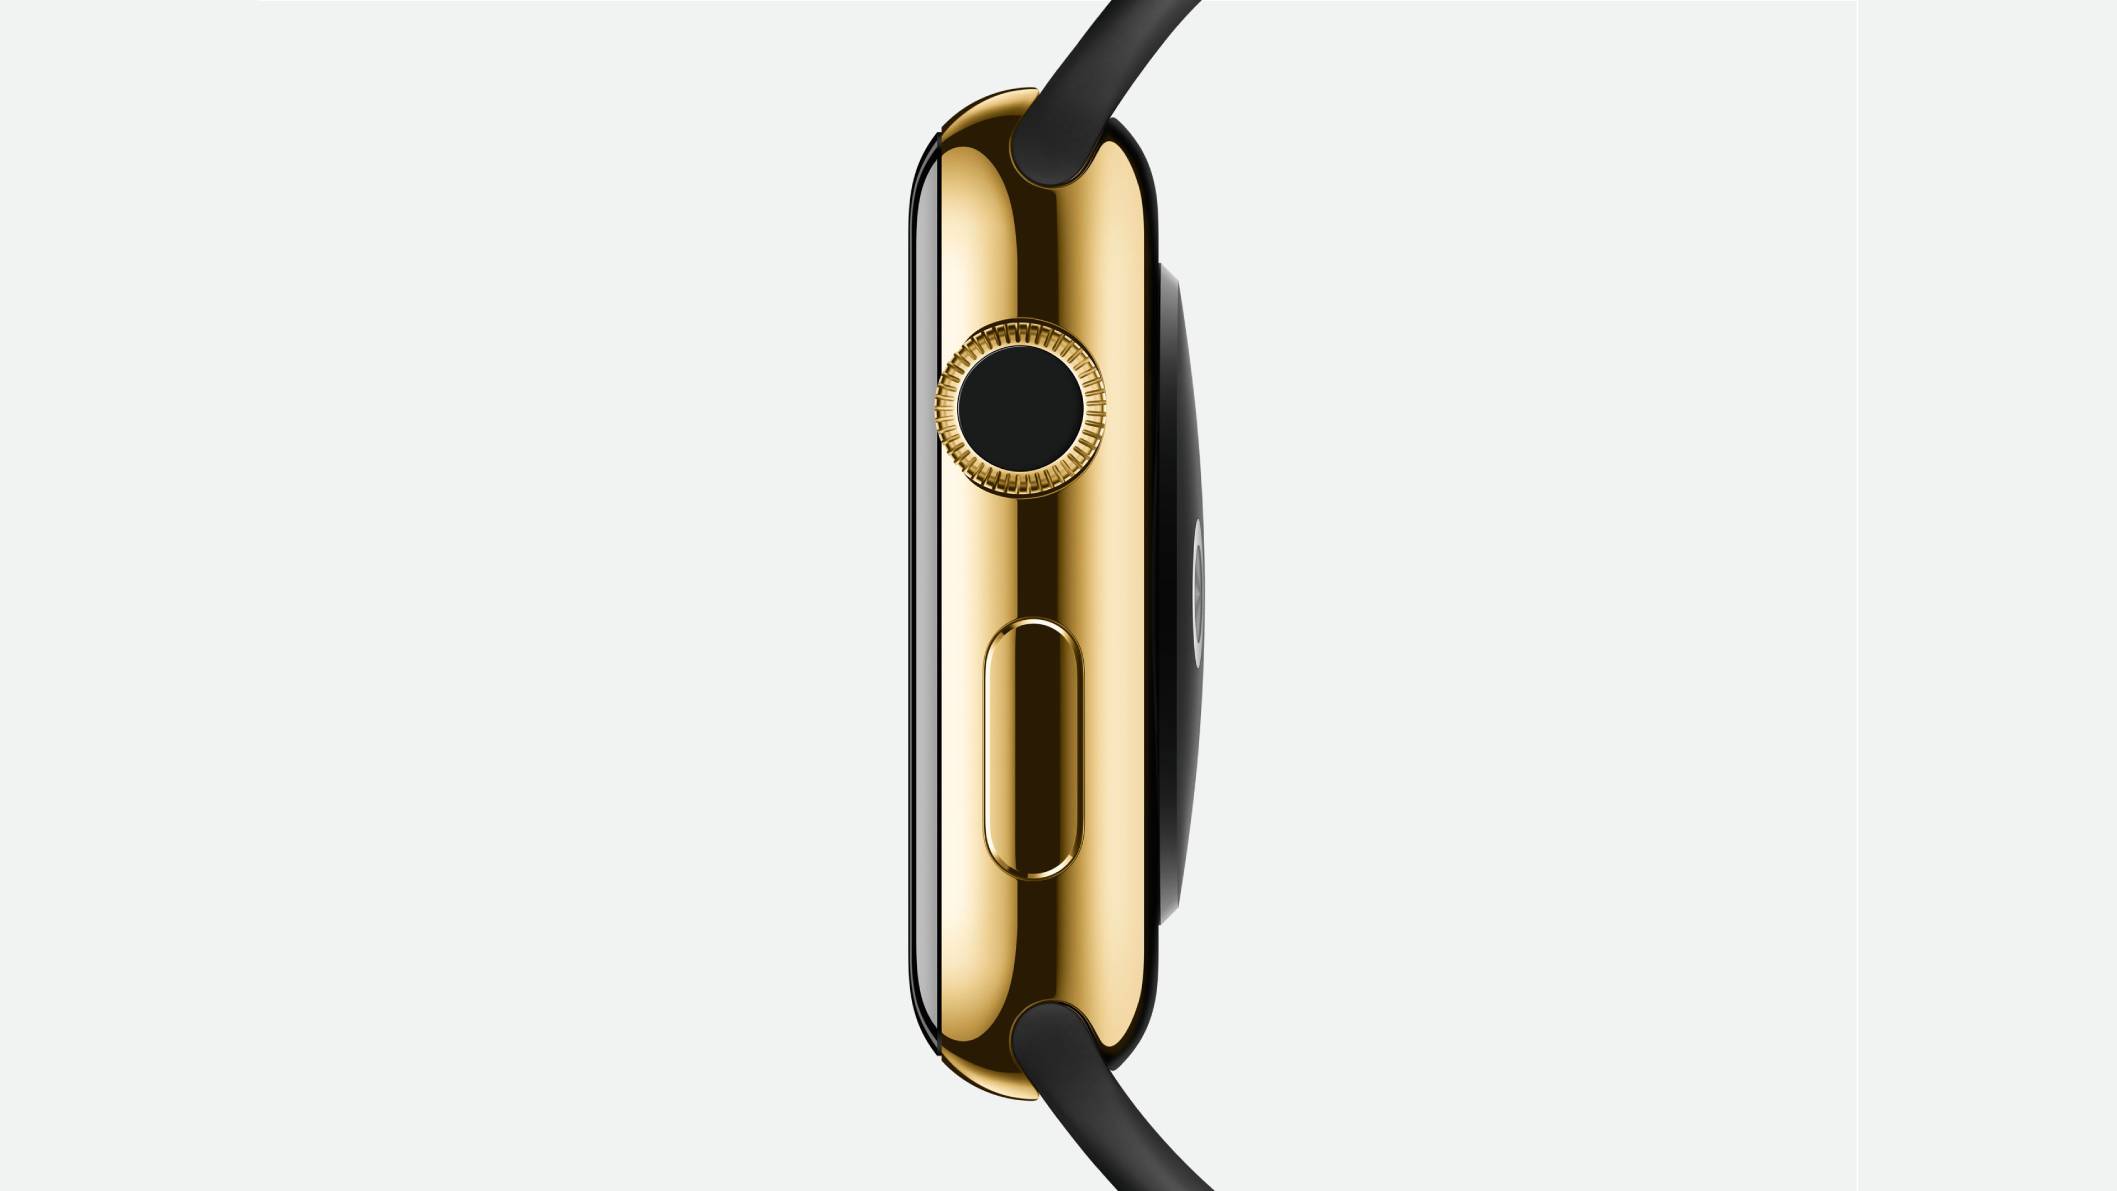 Original Apple Watch is Now Obsolete, Including $17,000 Gold Model